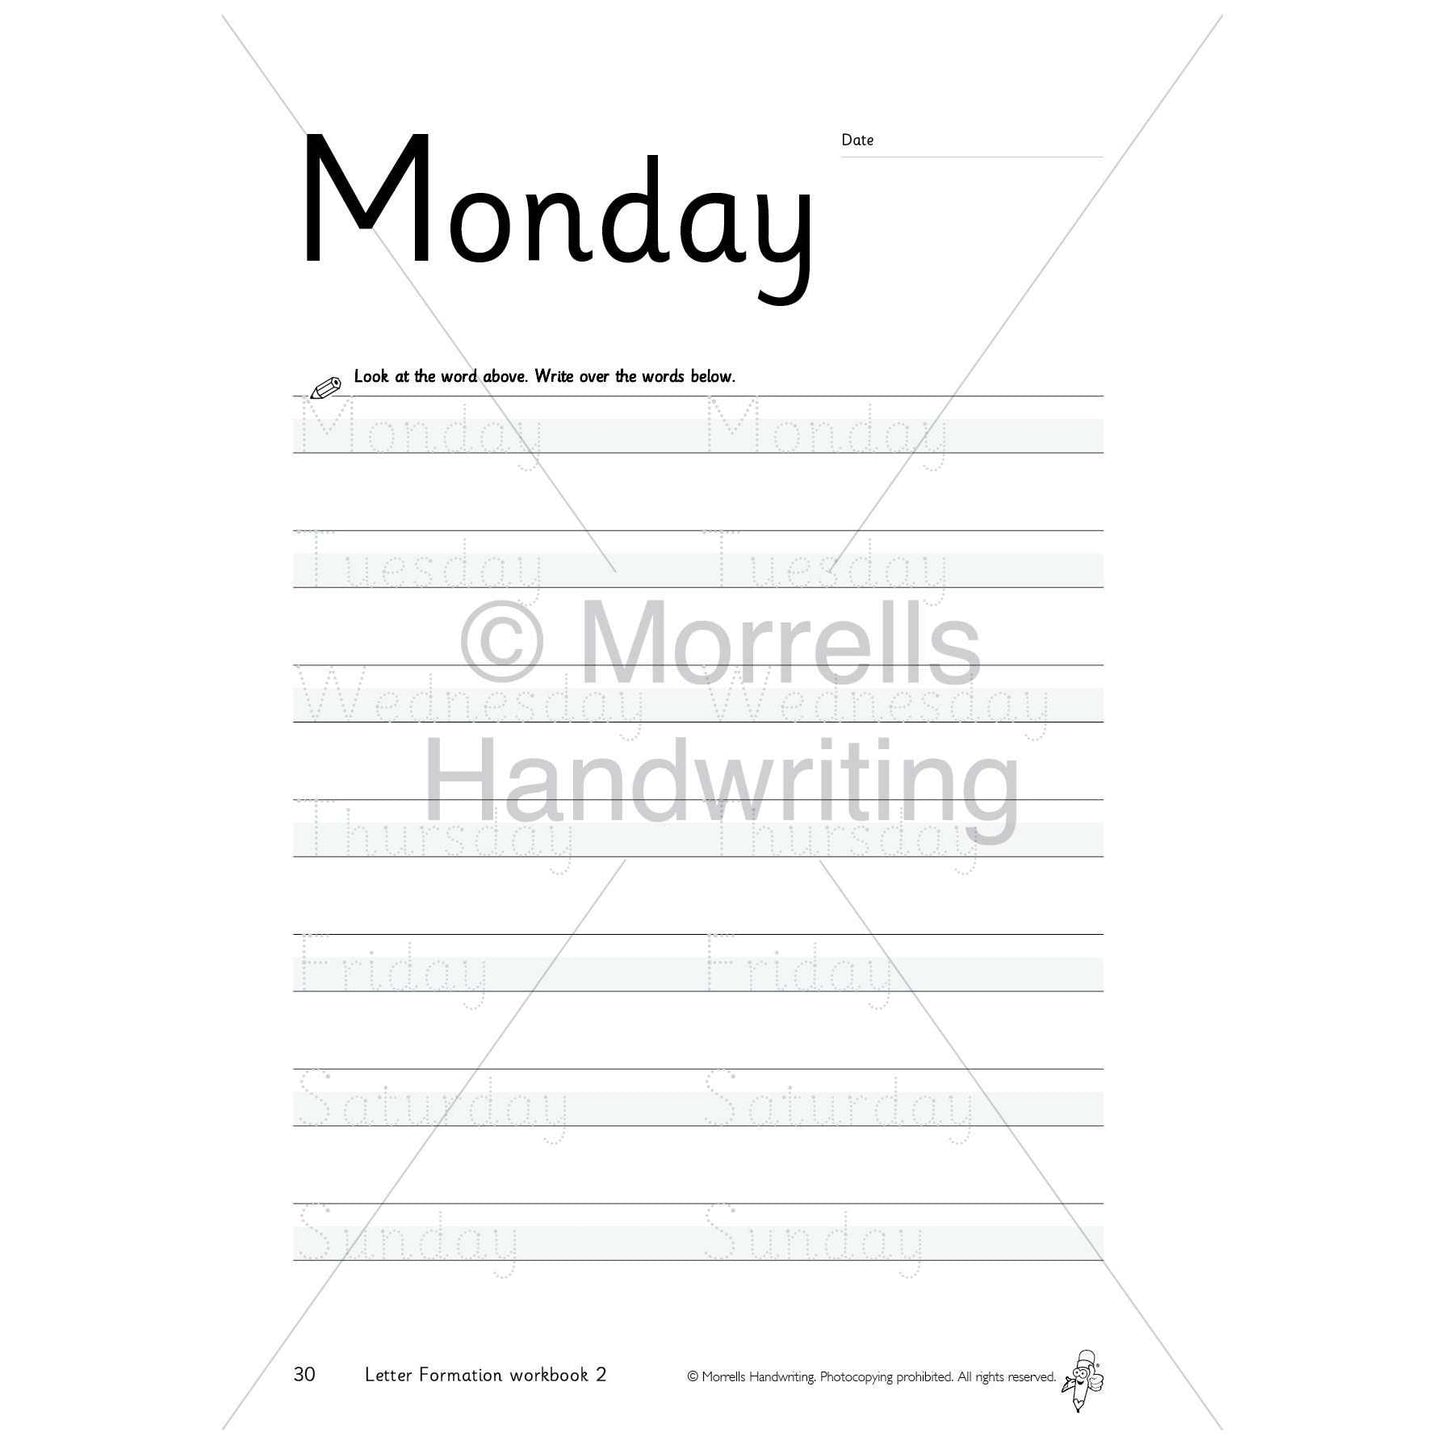 Morrells Handwriting - Letter Formation - Workbook 2:Primary Classroom Resources